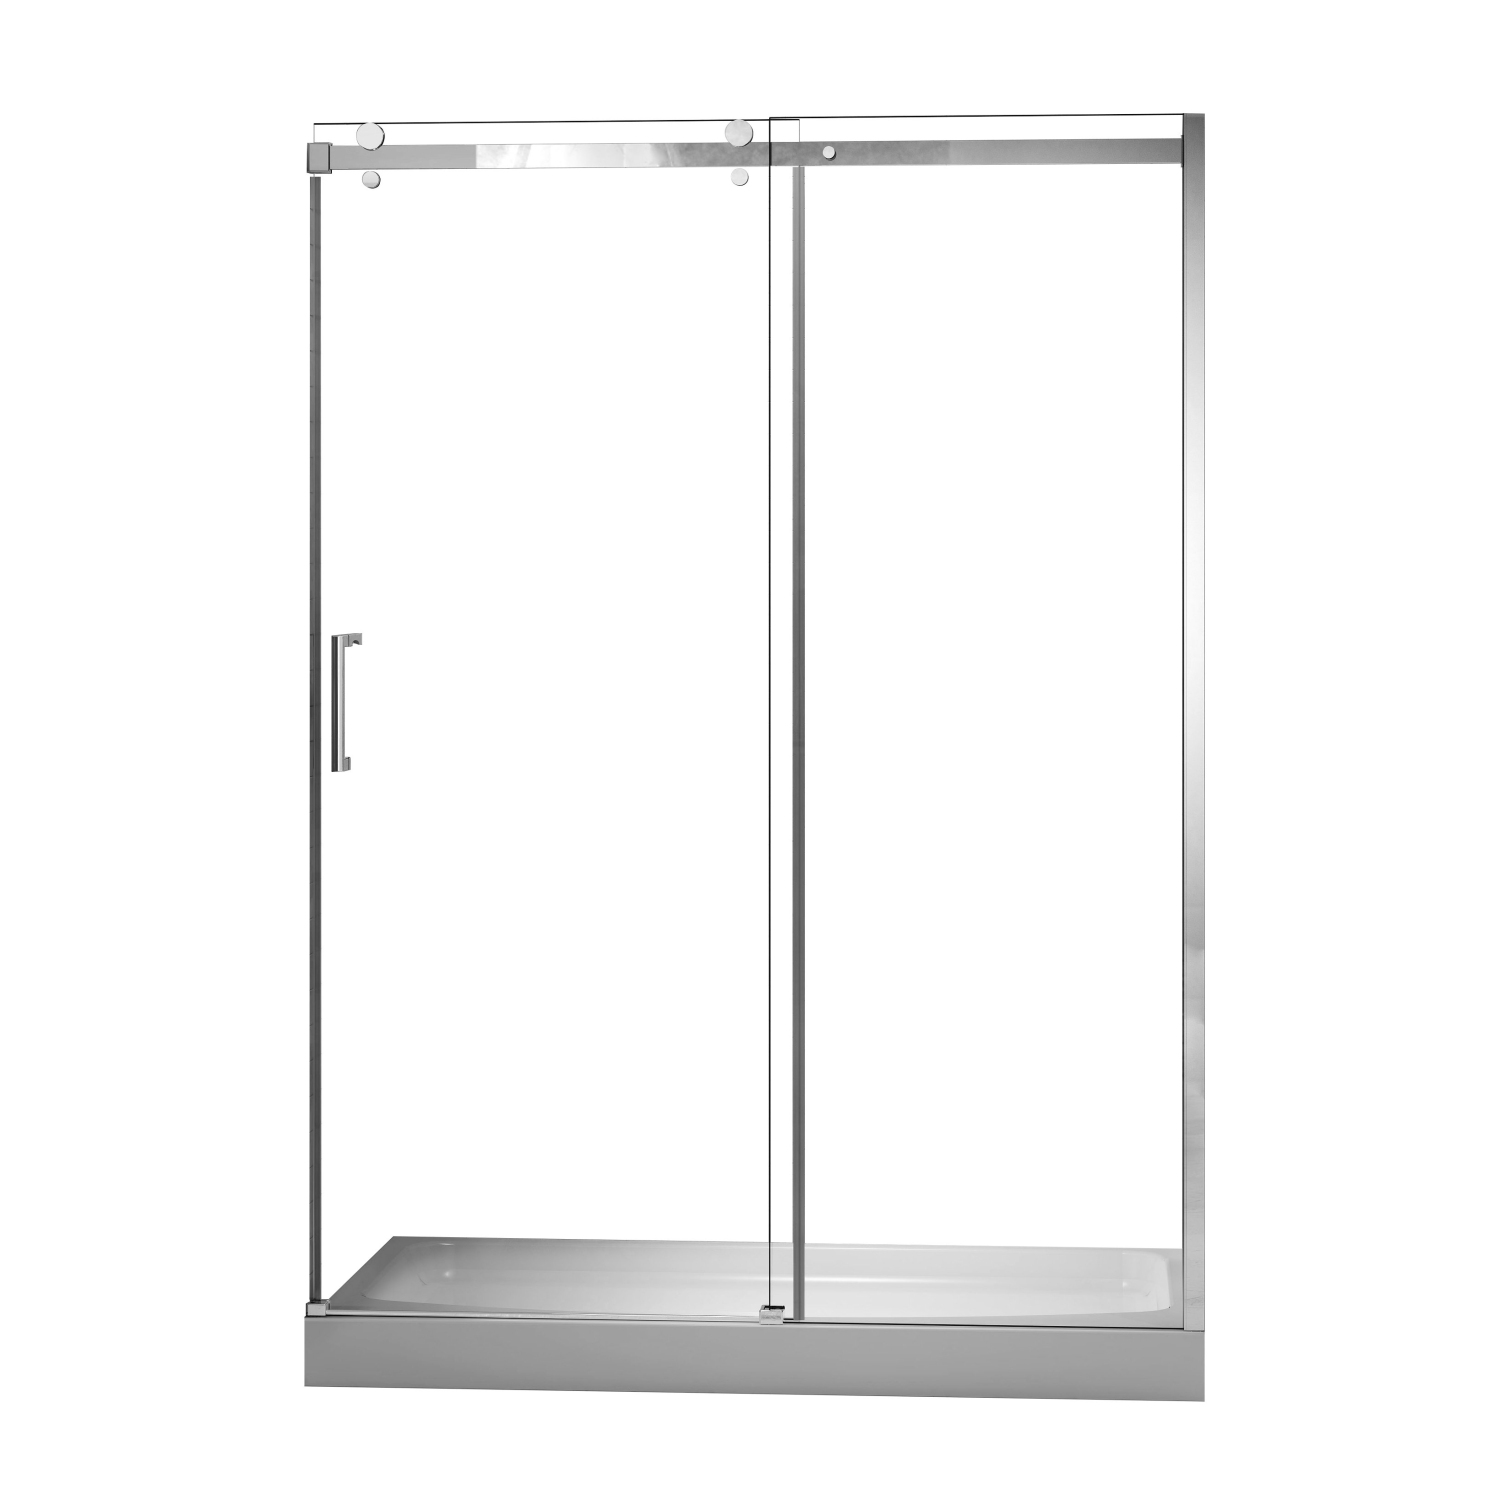 Agua Canada - CLD-48 - Reversible Shower Door 8mm Tempered Glass